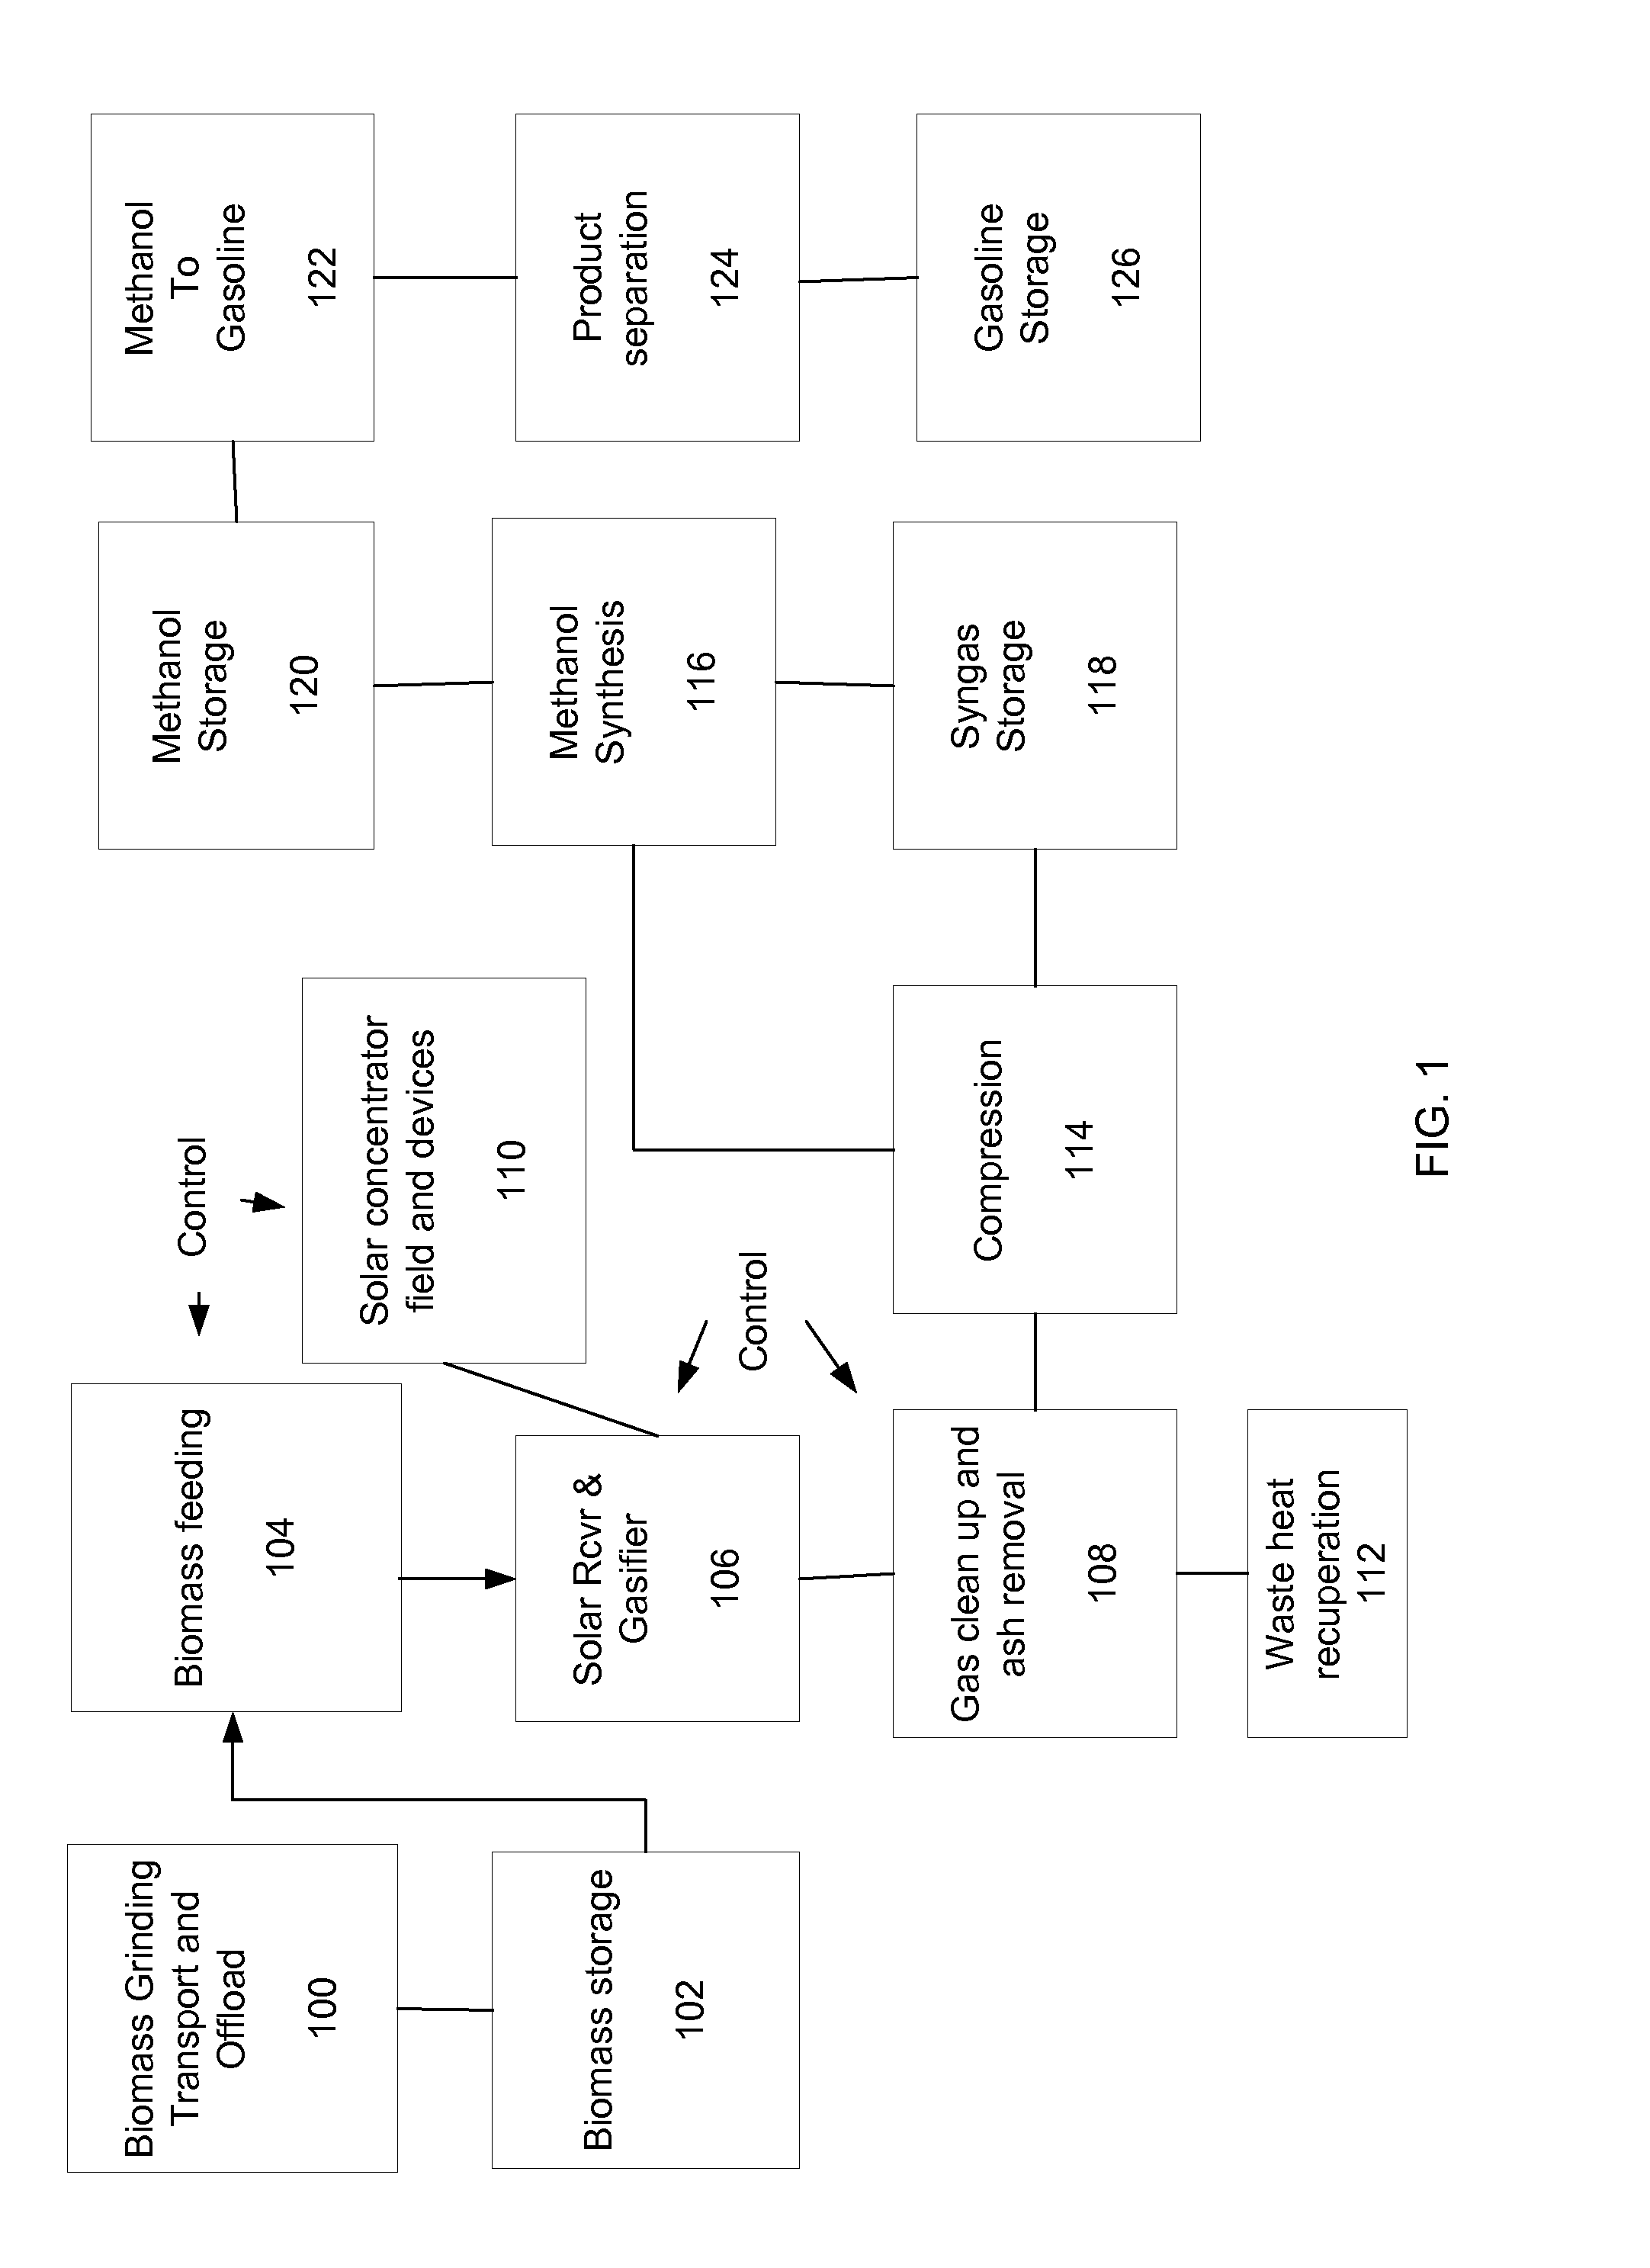 Systems and methods for biomass grinding and feeding